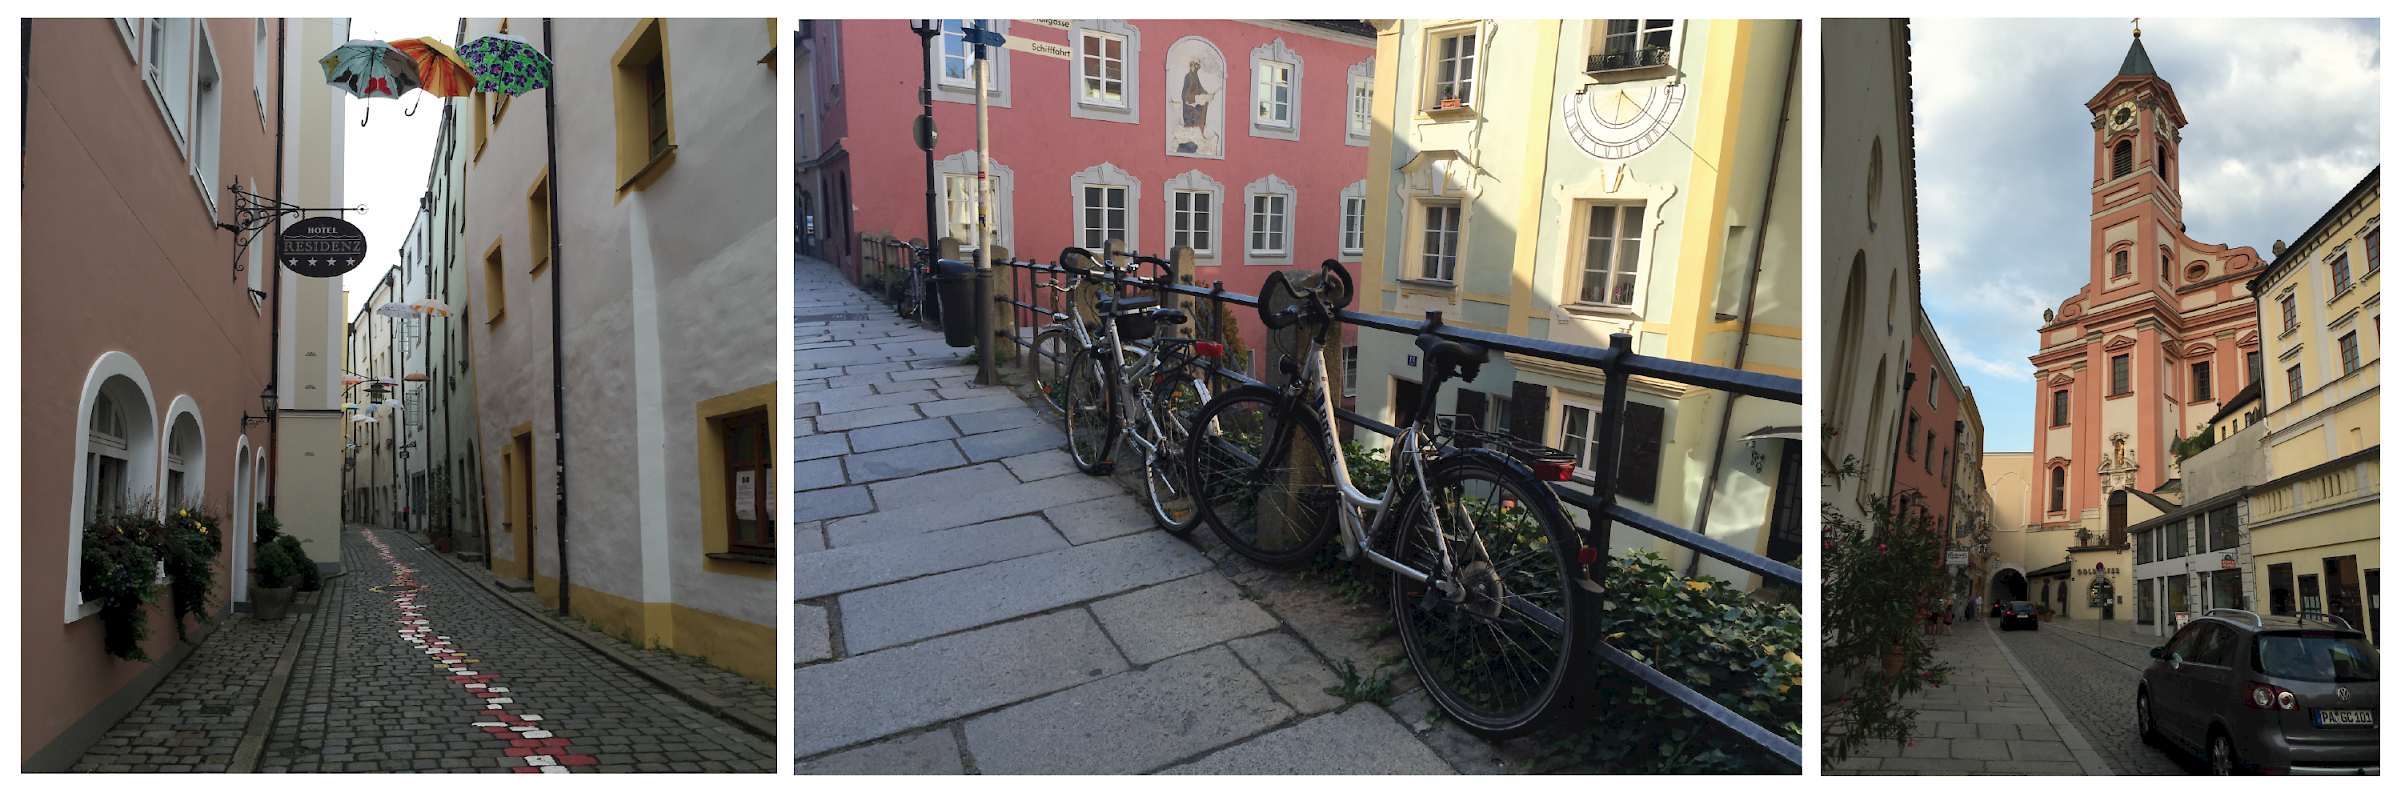 Cobbled streets and beautiful architecture in Passau.